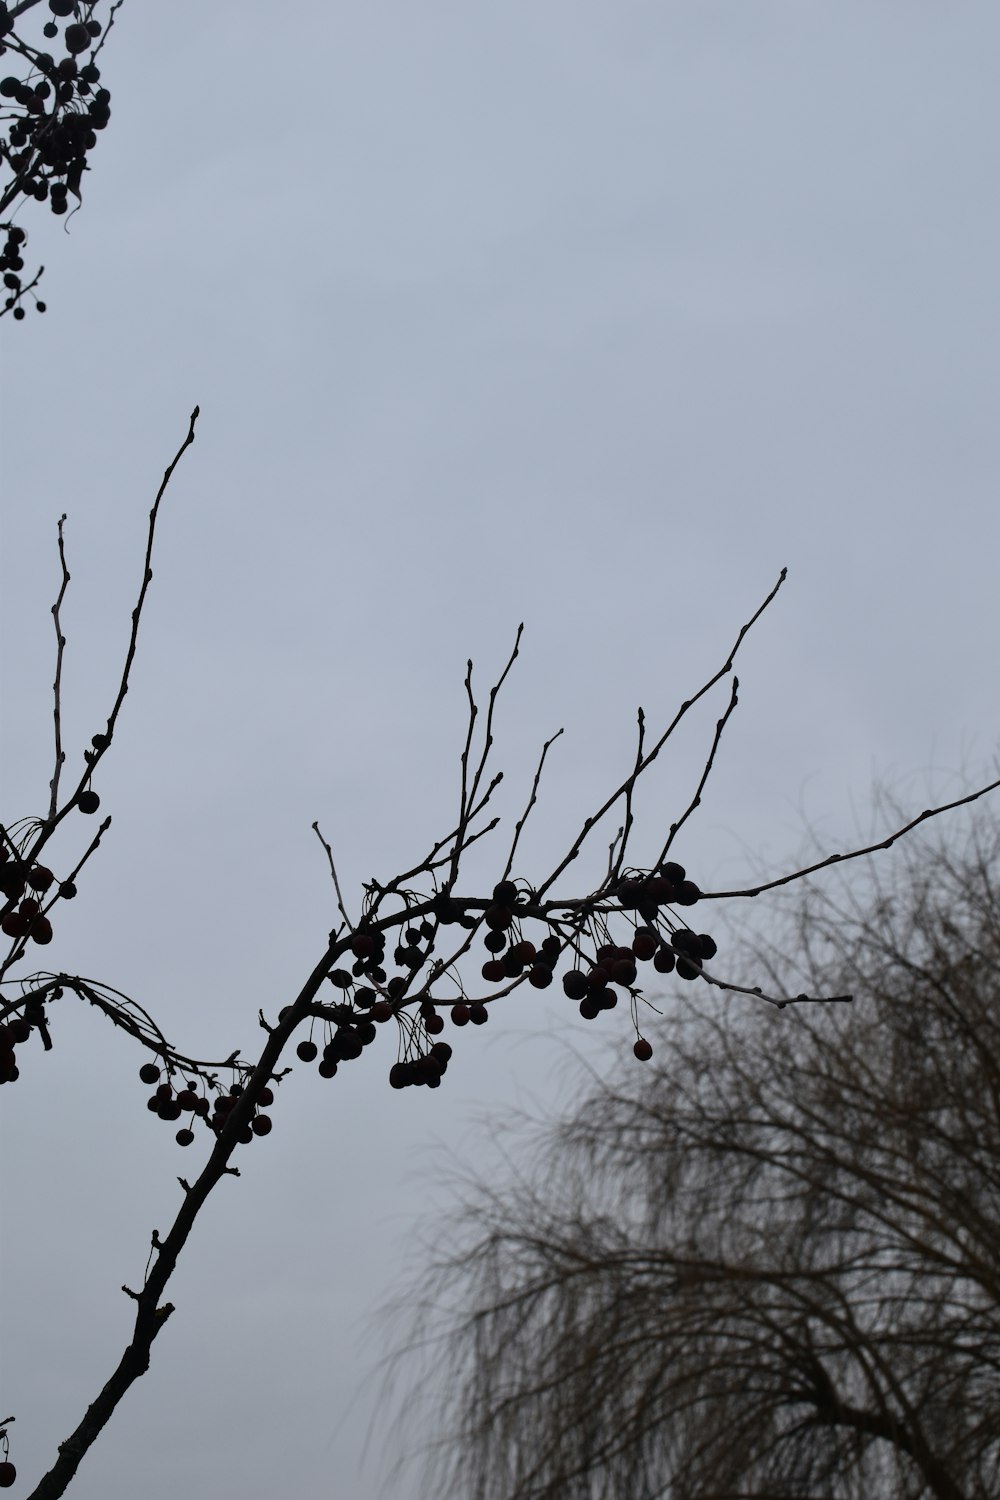 a tree branch with berries on it and a building in the background